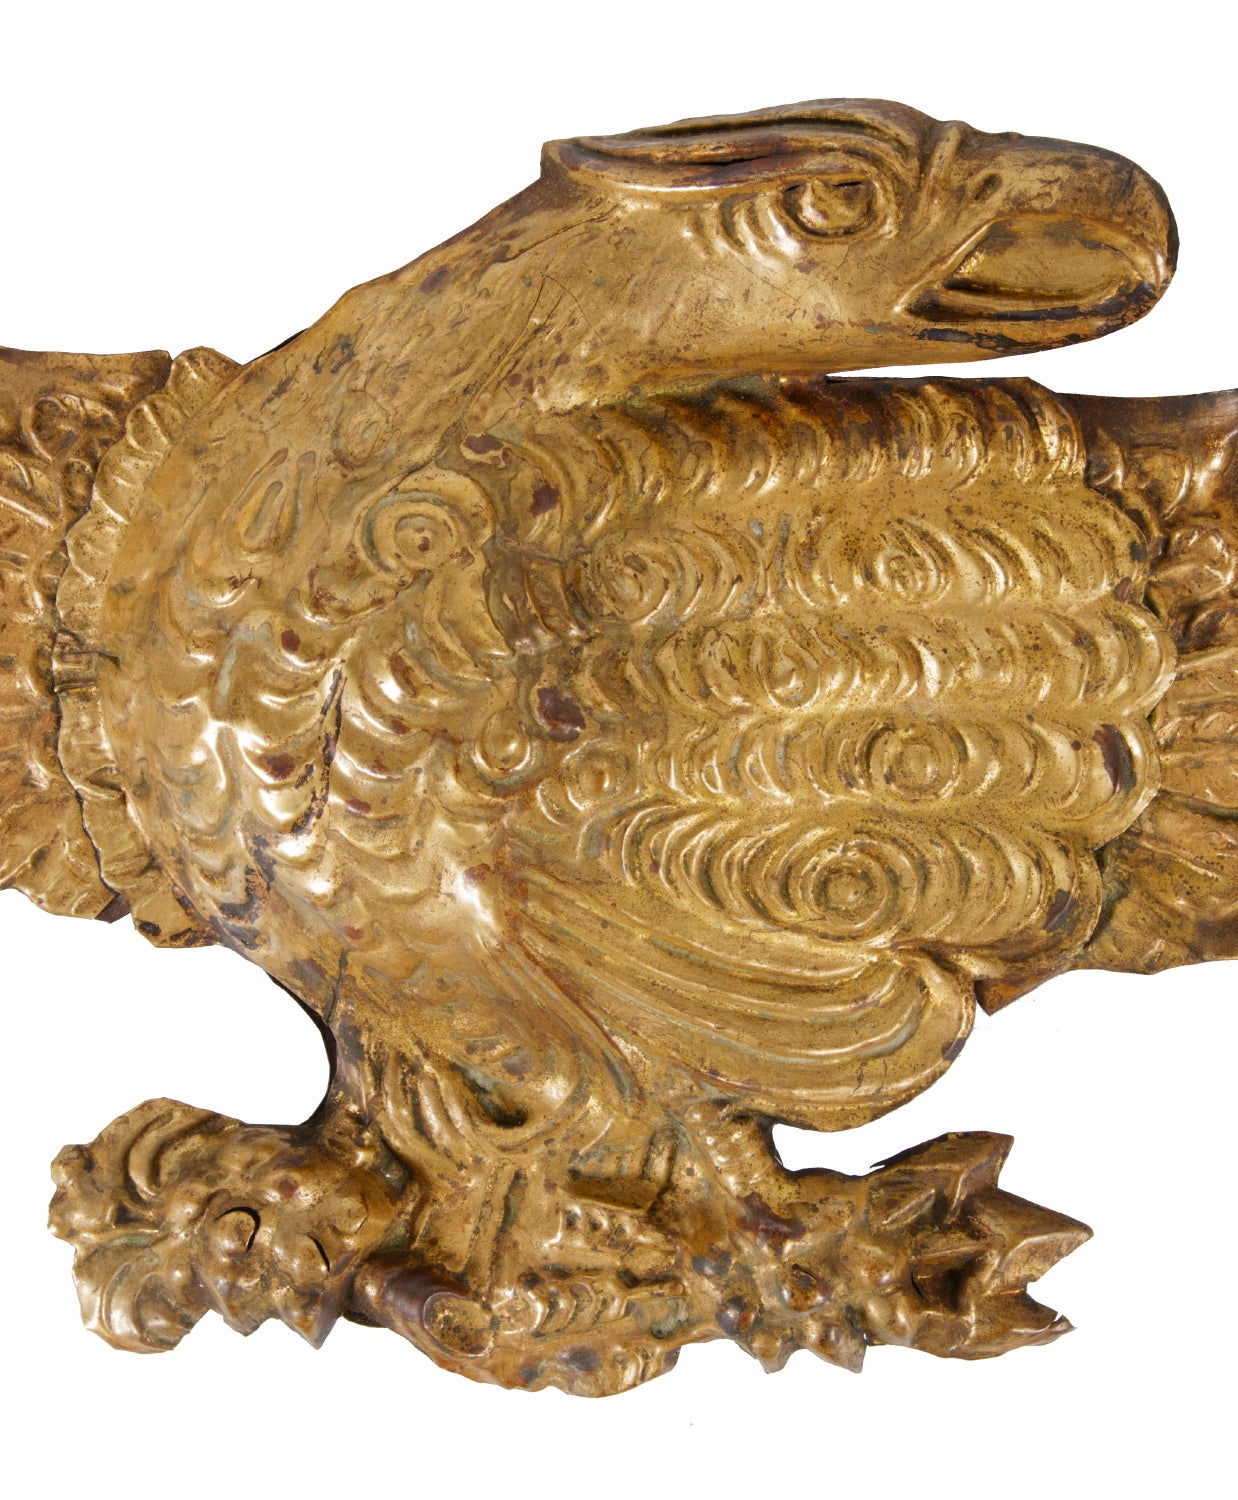 Pressed brass eagle, an early parade flag holder and bunting tie-back, an especially attractive example, circa 1870-1890s.

Pressed brass eagles decorated the interiors of Civil War veterans' halls, armories and government buildings. They